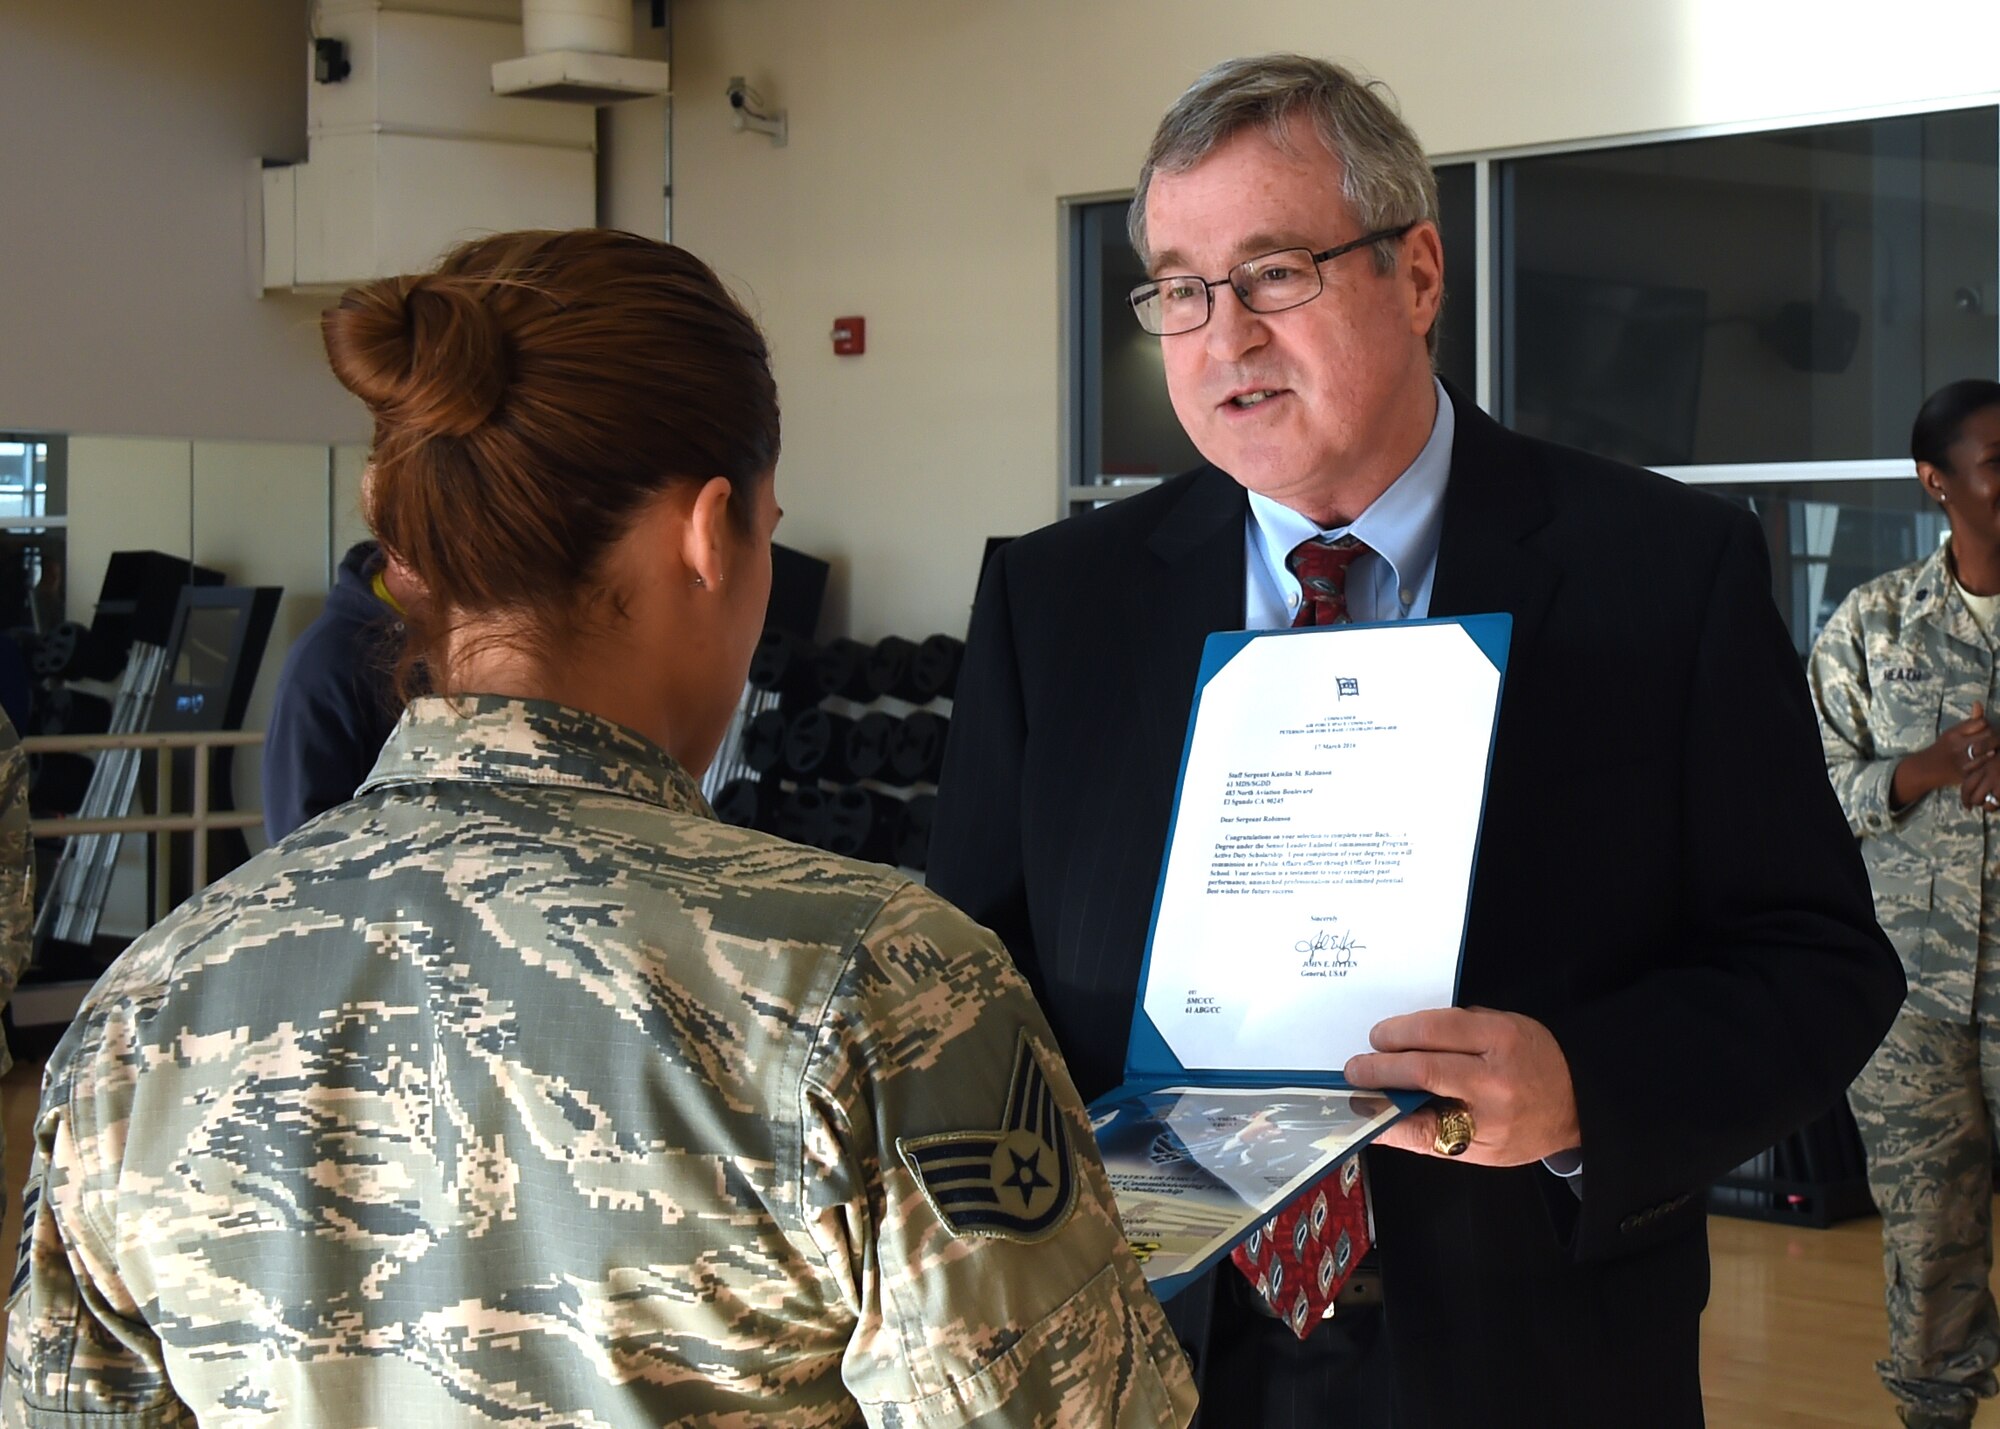 Thomas Fitzgerald, Space and Missile Systems Center acting executive director, presents a certificate and letter of selection for Officer Training School through the Senior Leader Enlisted Commissioning Program from Gen. John Hyten, commander of Air Force Space Command to Staff Sgt. Katelin Robinson, 61st Medical Squadron noncommissioned officer in charge of Dental Logistics at the Los Angeles Air Force Base medical clinic in El Segundo, Calif. (U.S. Air Force photo/Sarah Corrice)